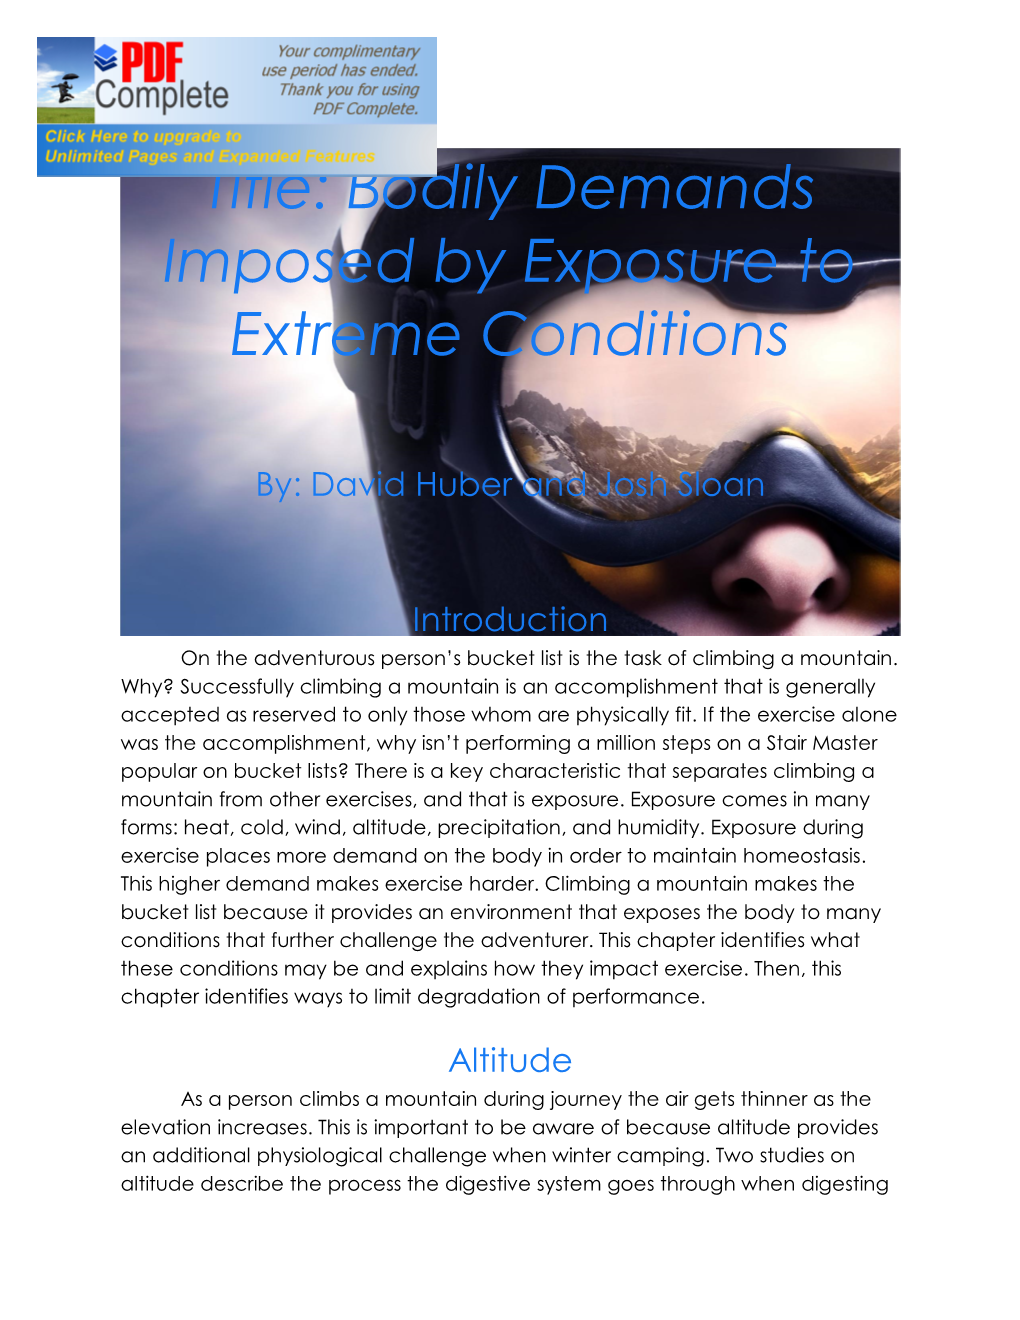 Title: Bodily Demands Imposed by Exposure to Extreme Conditions